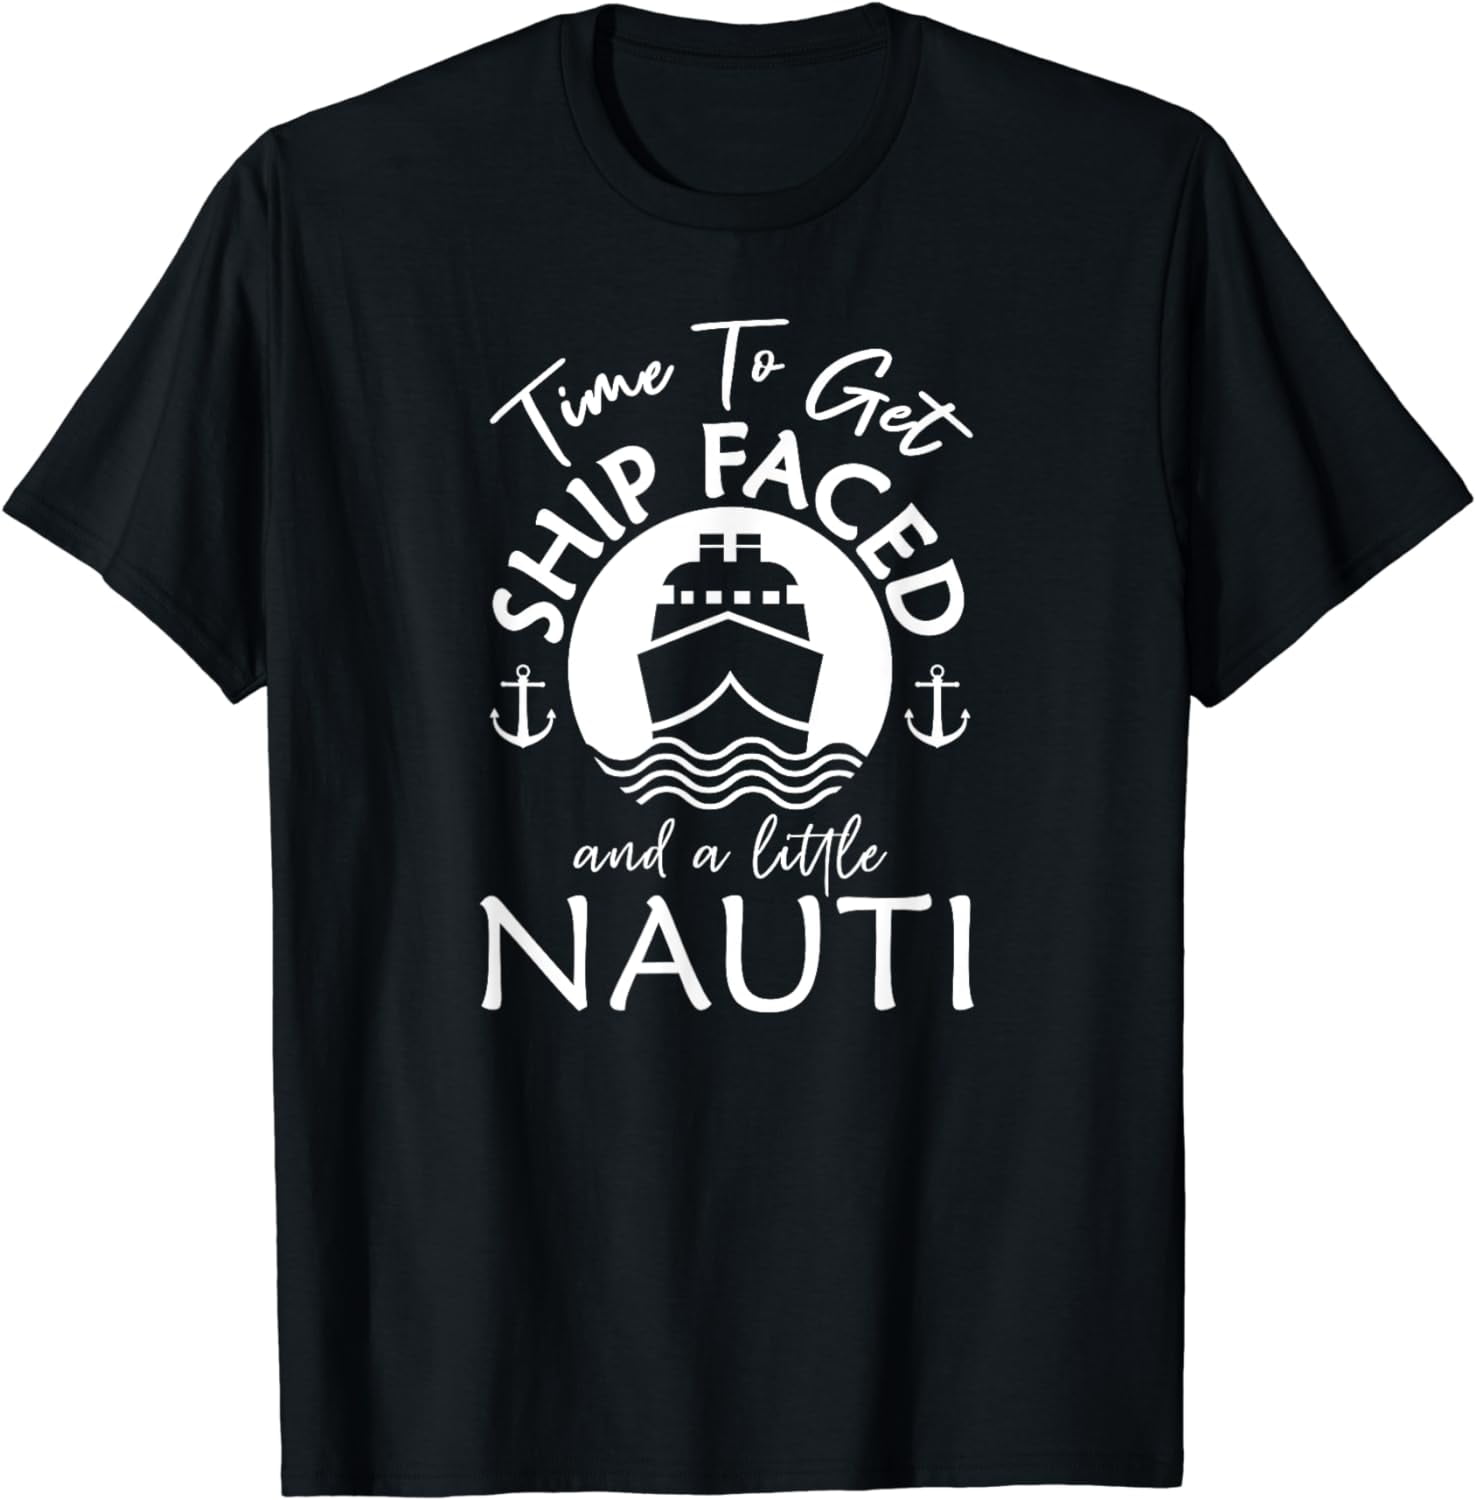 Time To Get Ship Faced and a Little Nauti - Cruise Ship T-Shirt ...